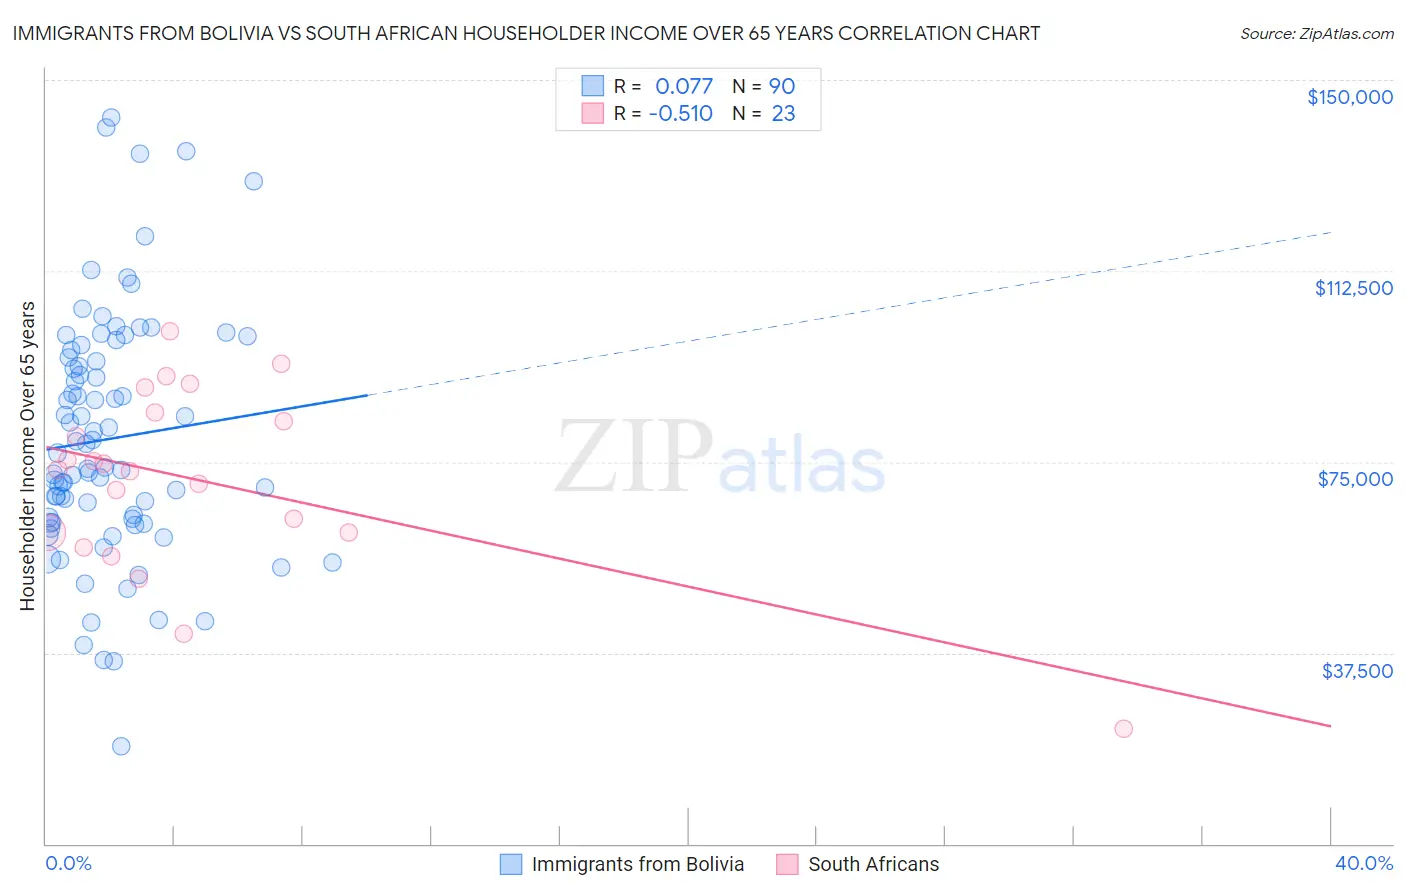 Immigrants from Bolivia vs South African Householder Income Over 65 years